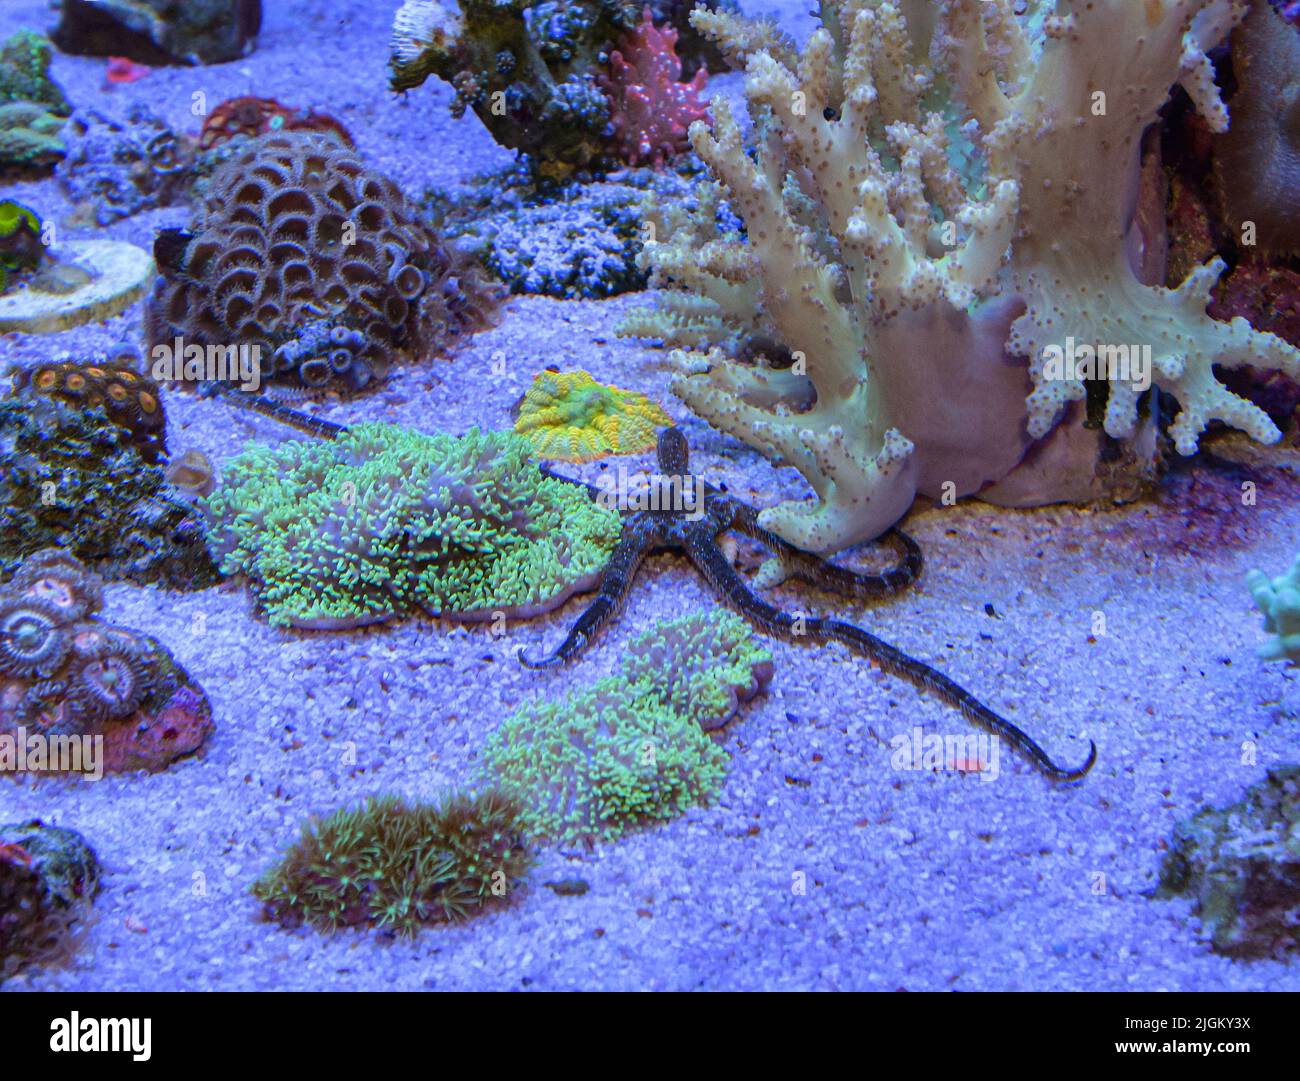 Brittle Sea Star moving on the bottom of marine aquarium between corals Stock Photo